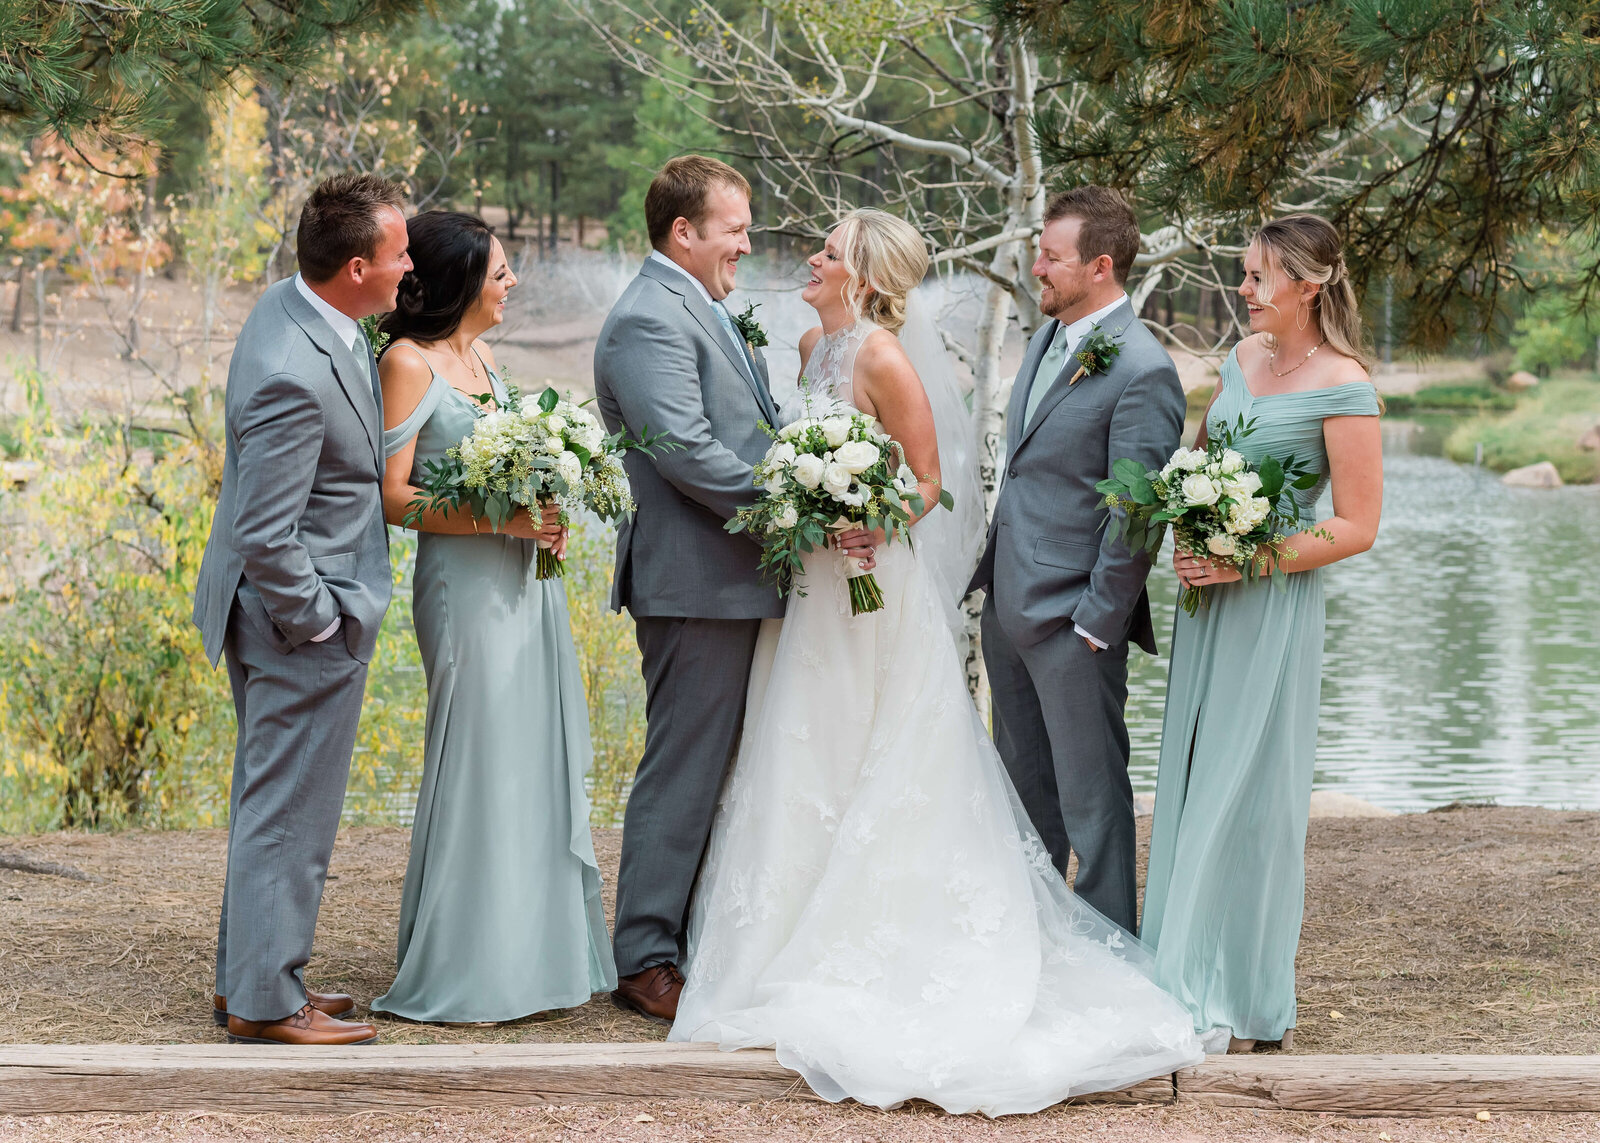 A bridal party stands together in front of a Virginia fountain and laugh together